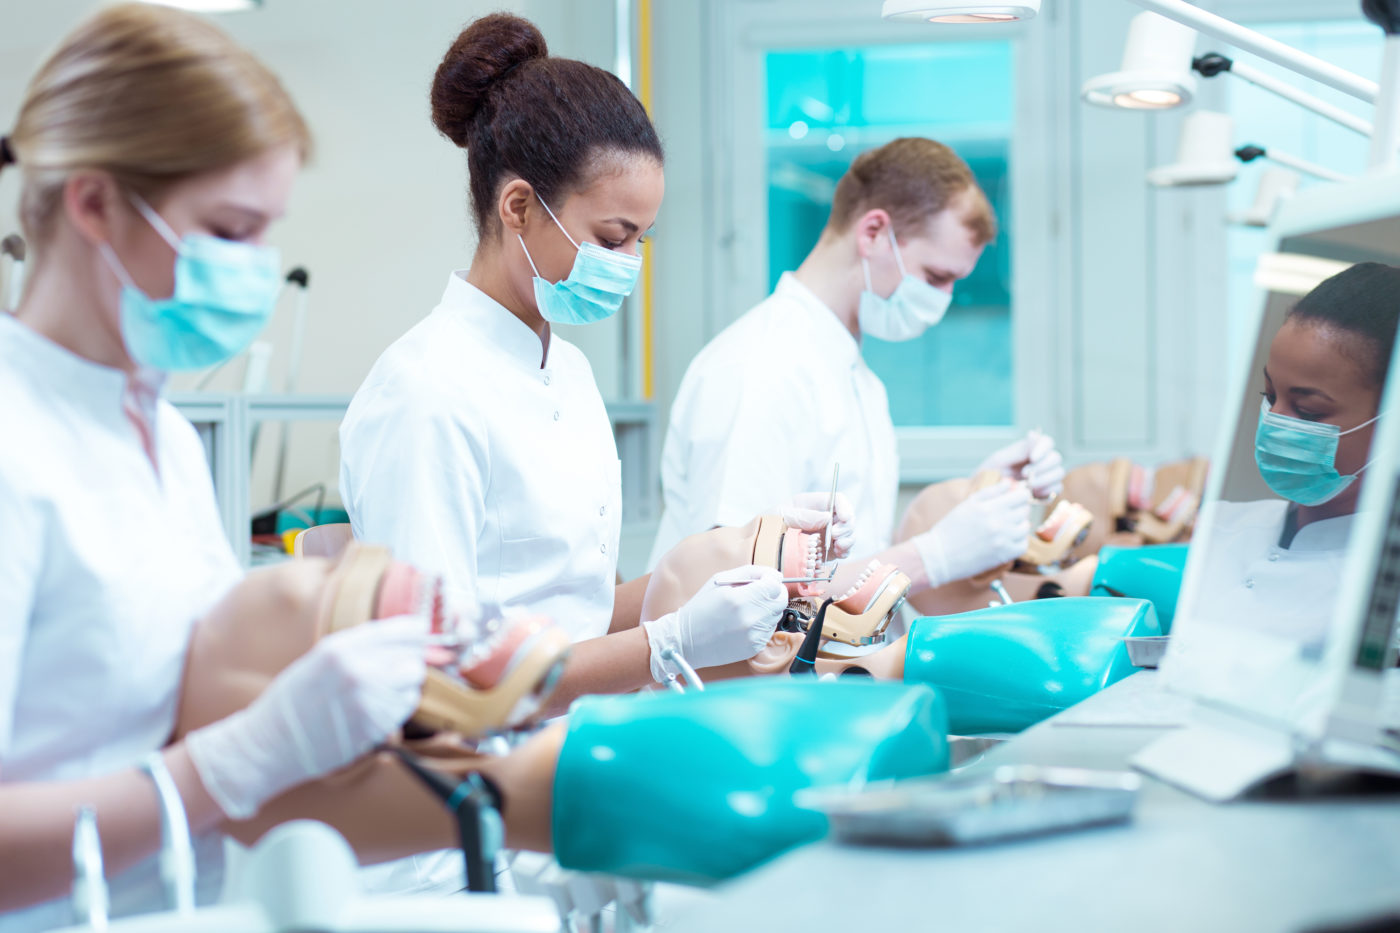 How Hard Is It to Get Into Dental School?